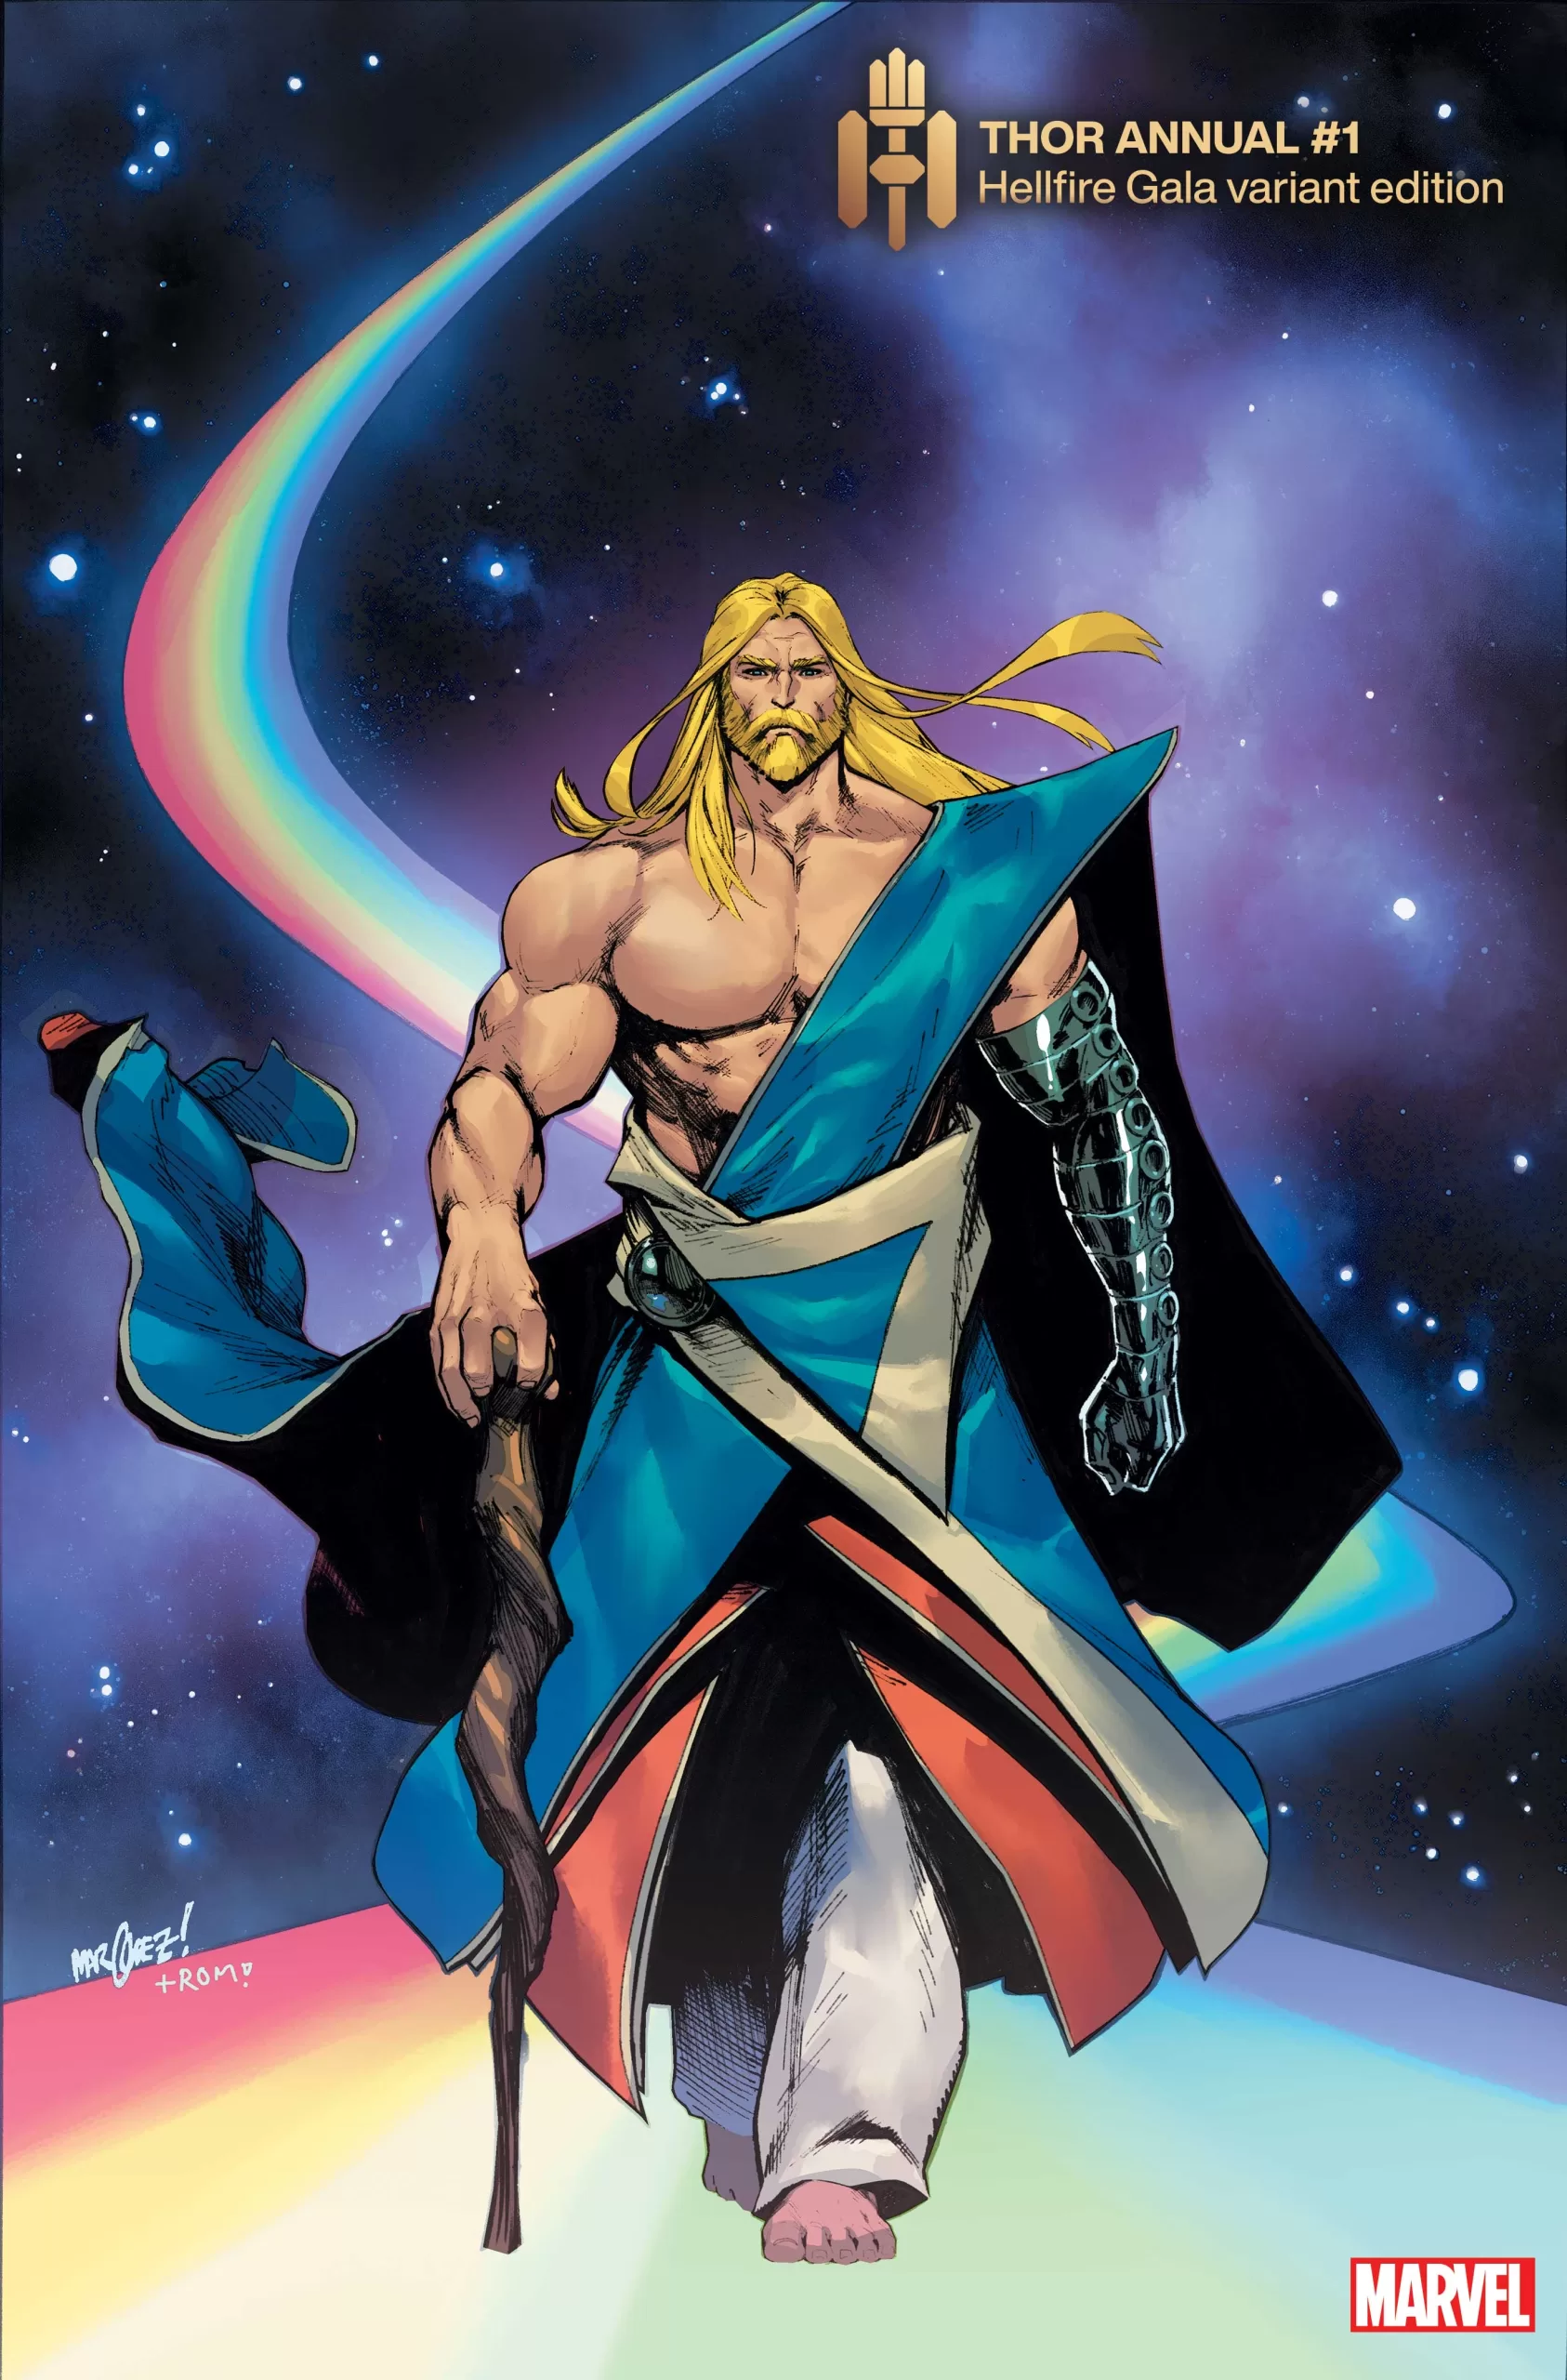 THOR ANNUAL #1 HELLFIRE GALA VARIANT COVER BY DAVID MARQUEZ